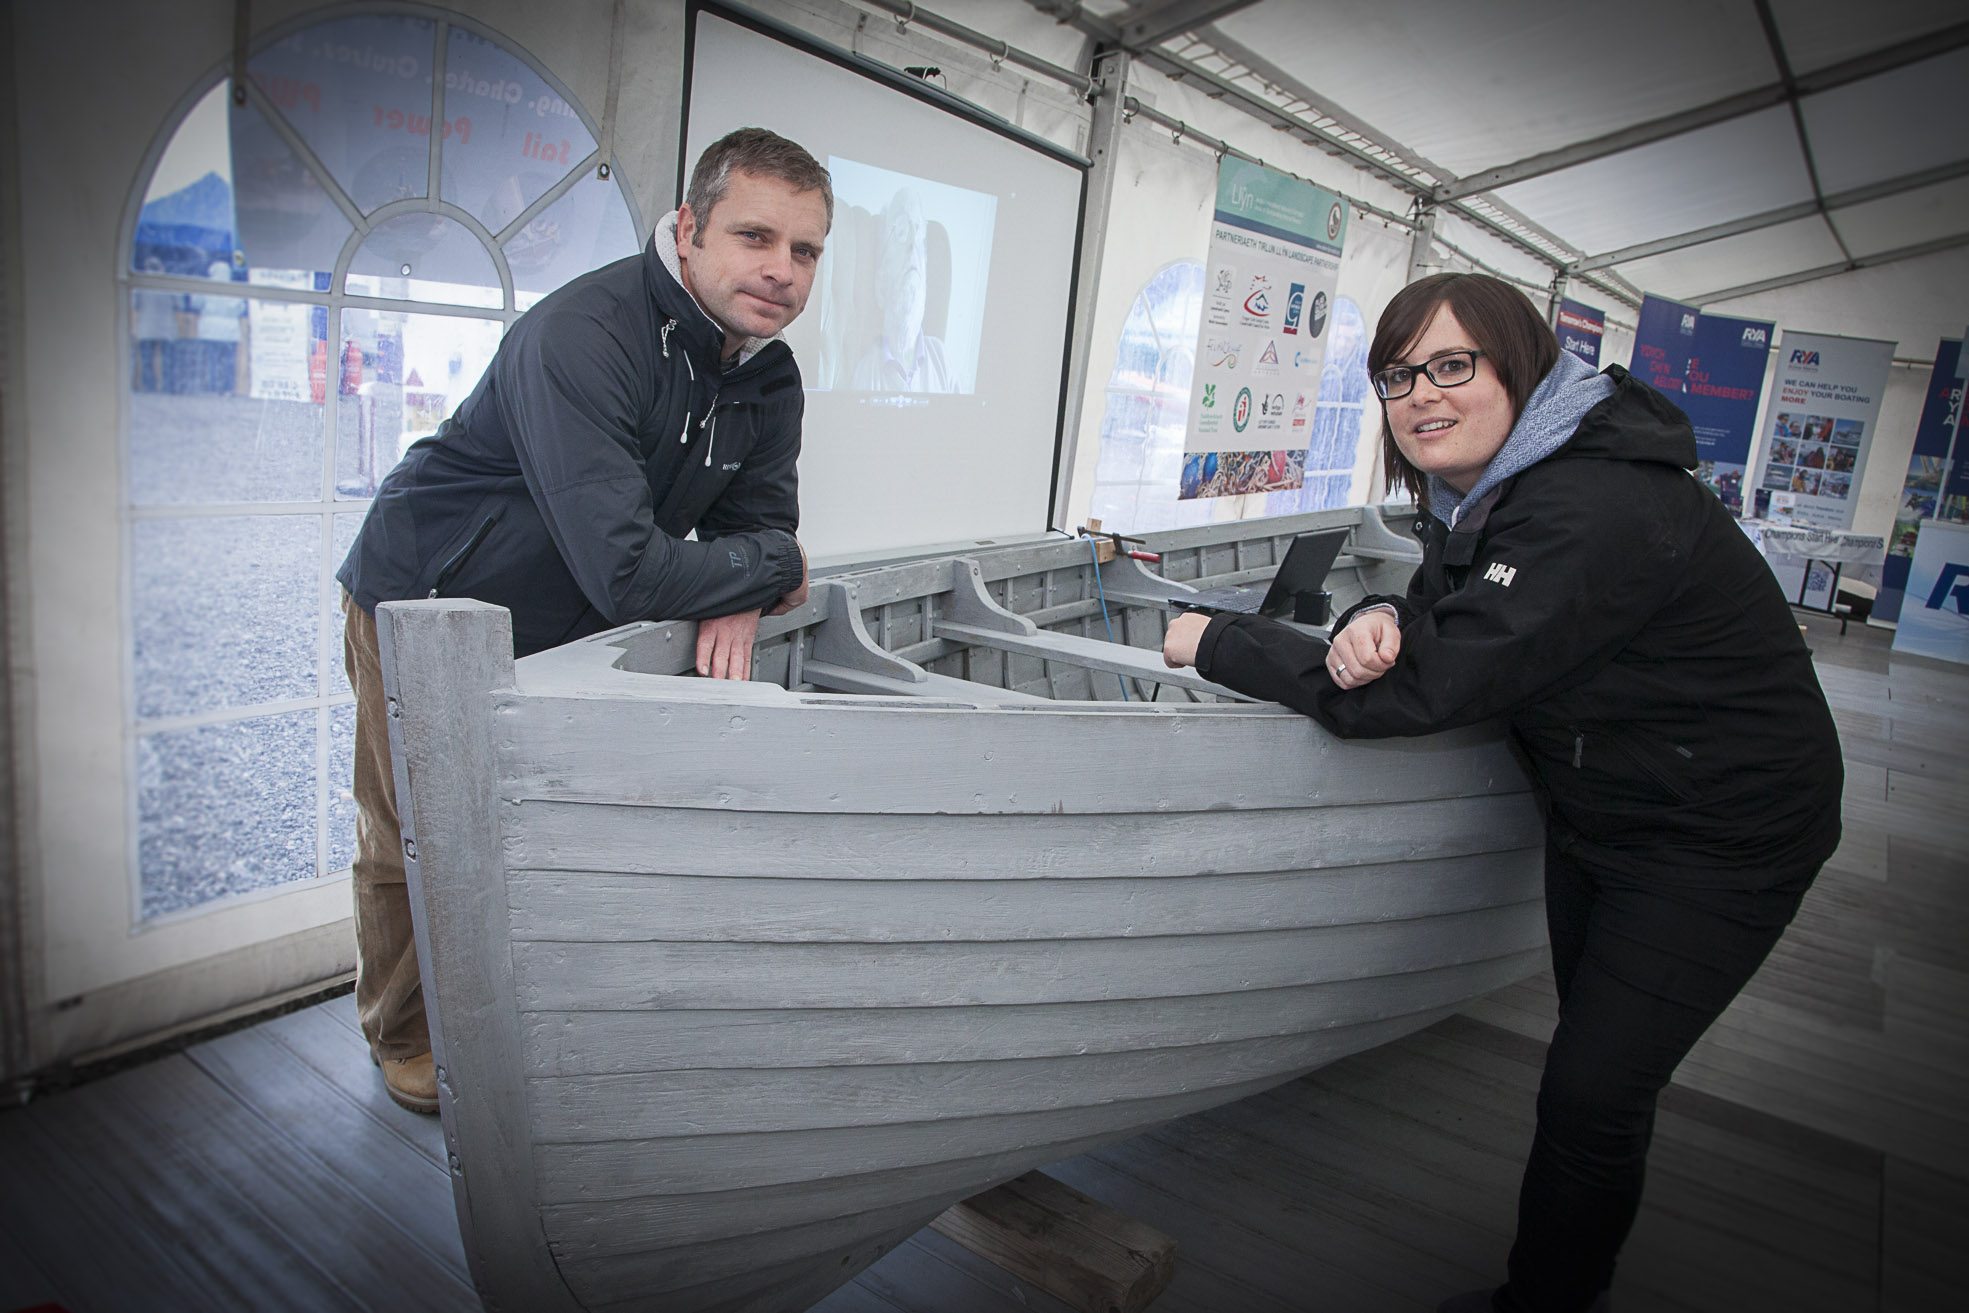 Sales buoyant after boat show